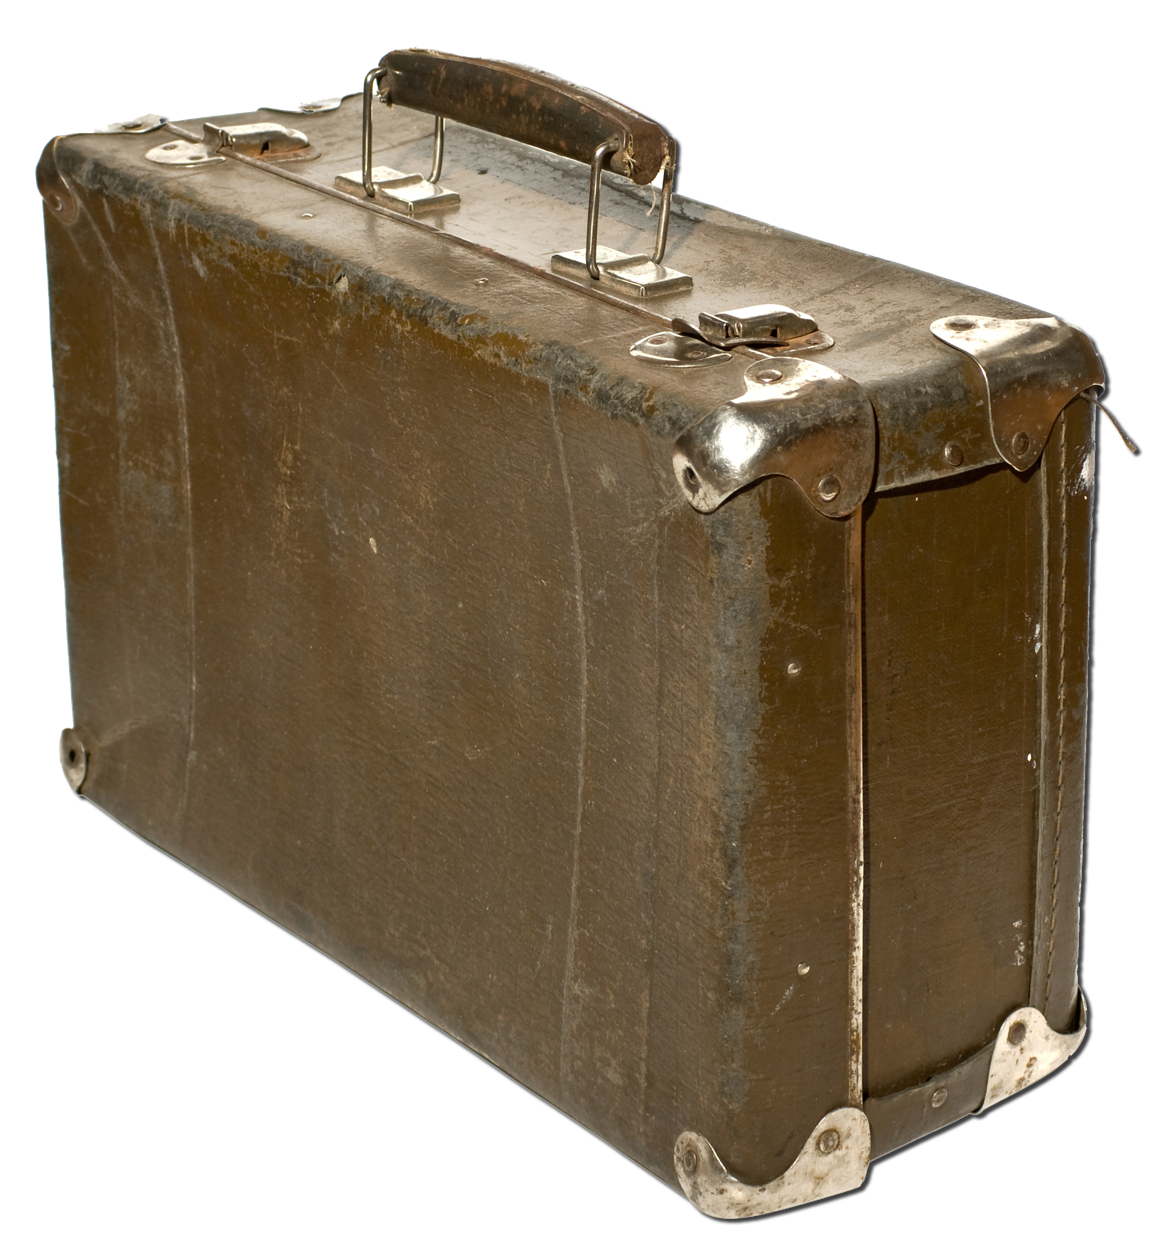 Luggage clipart brown suitcase. Png images transparent free